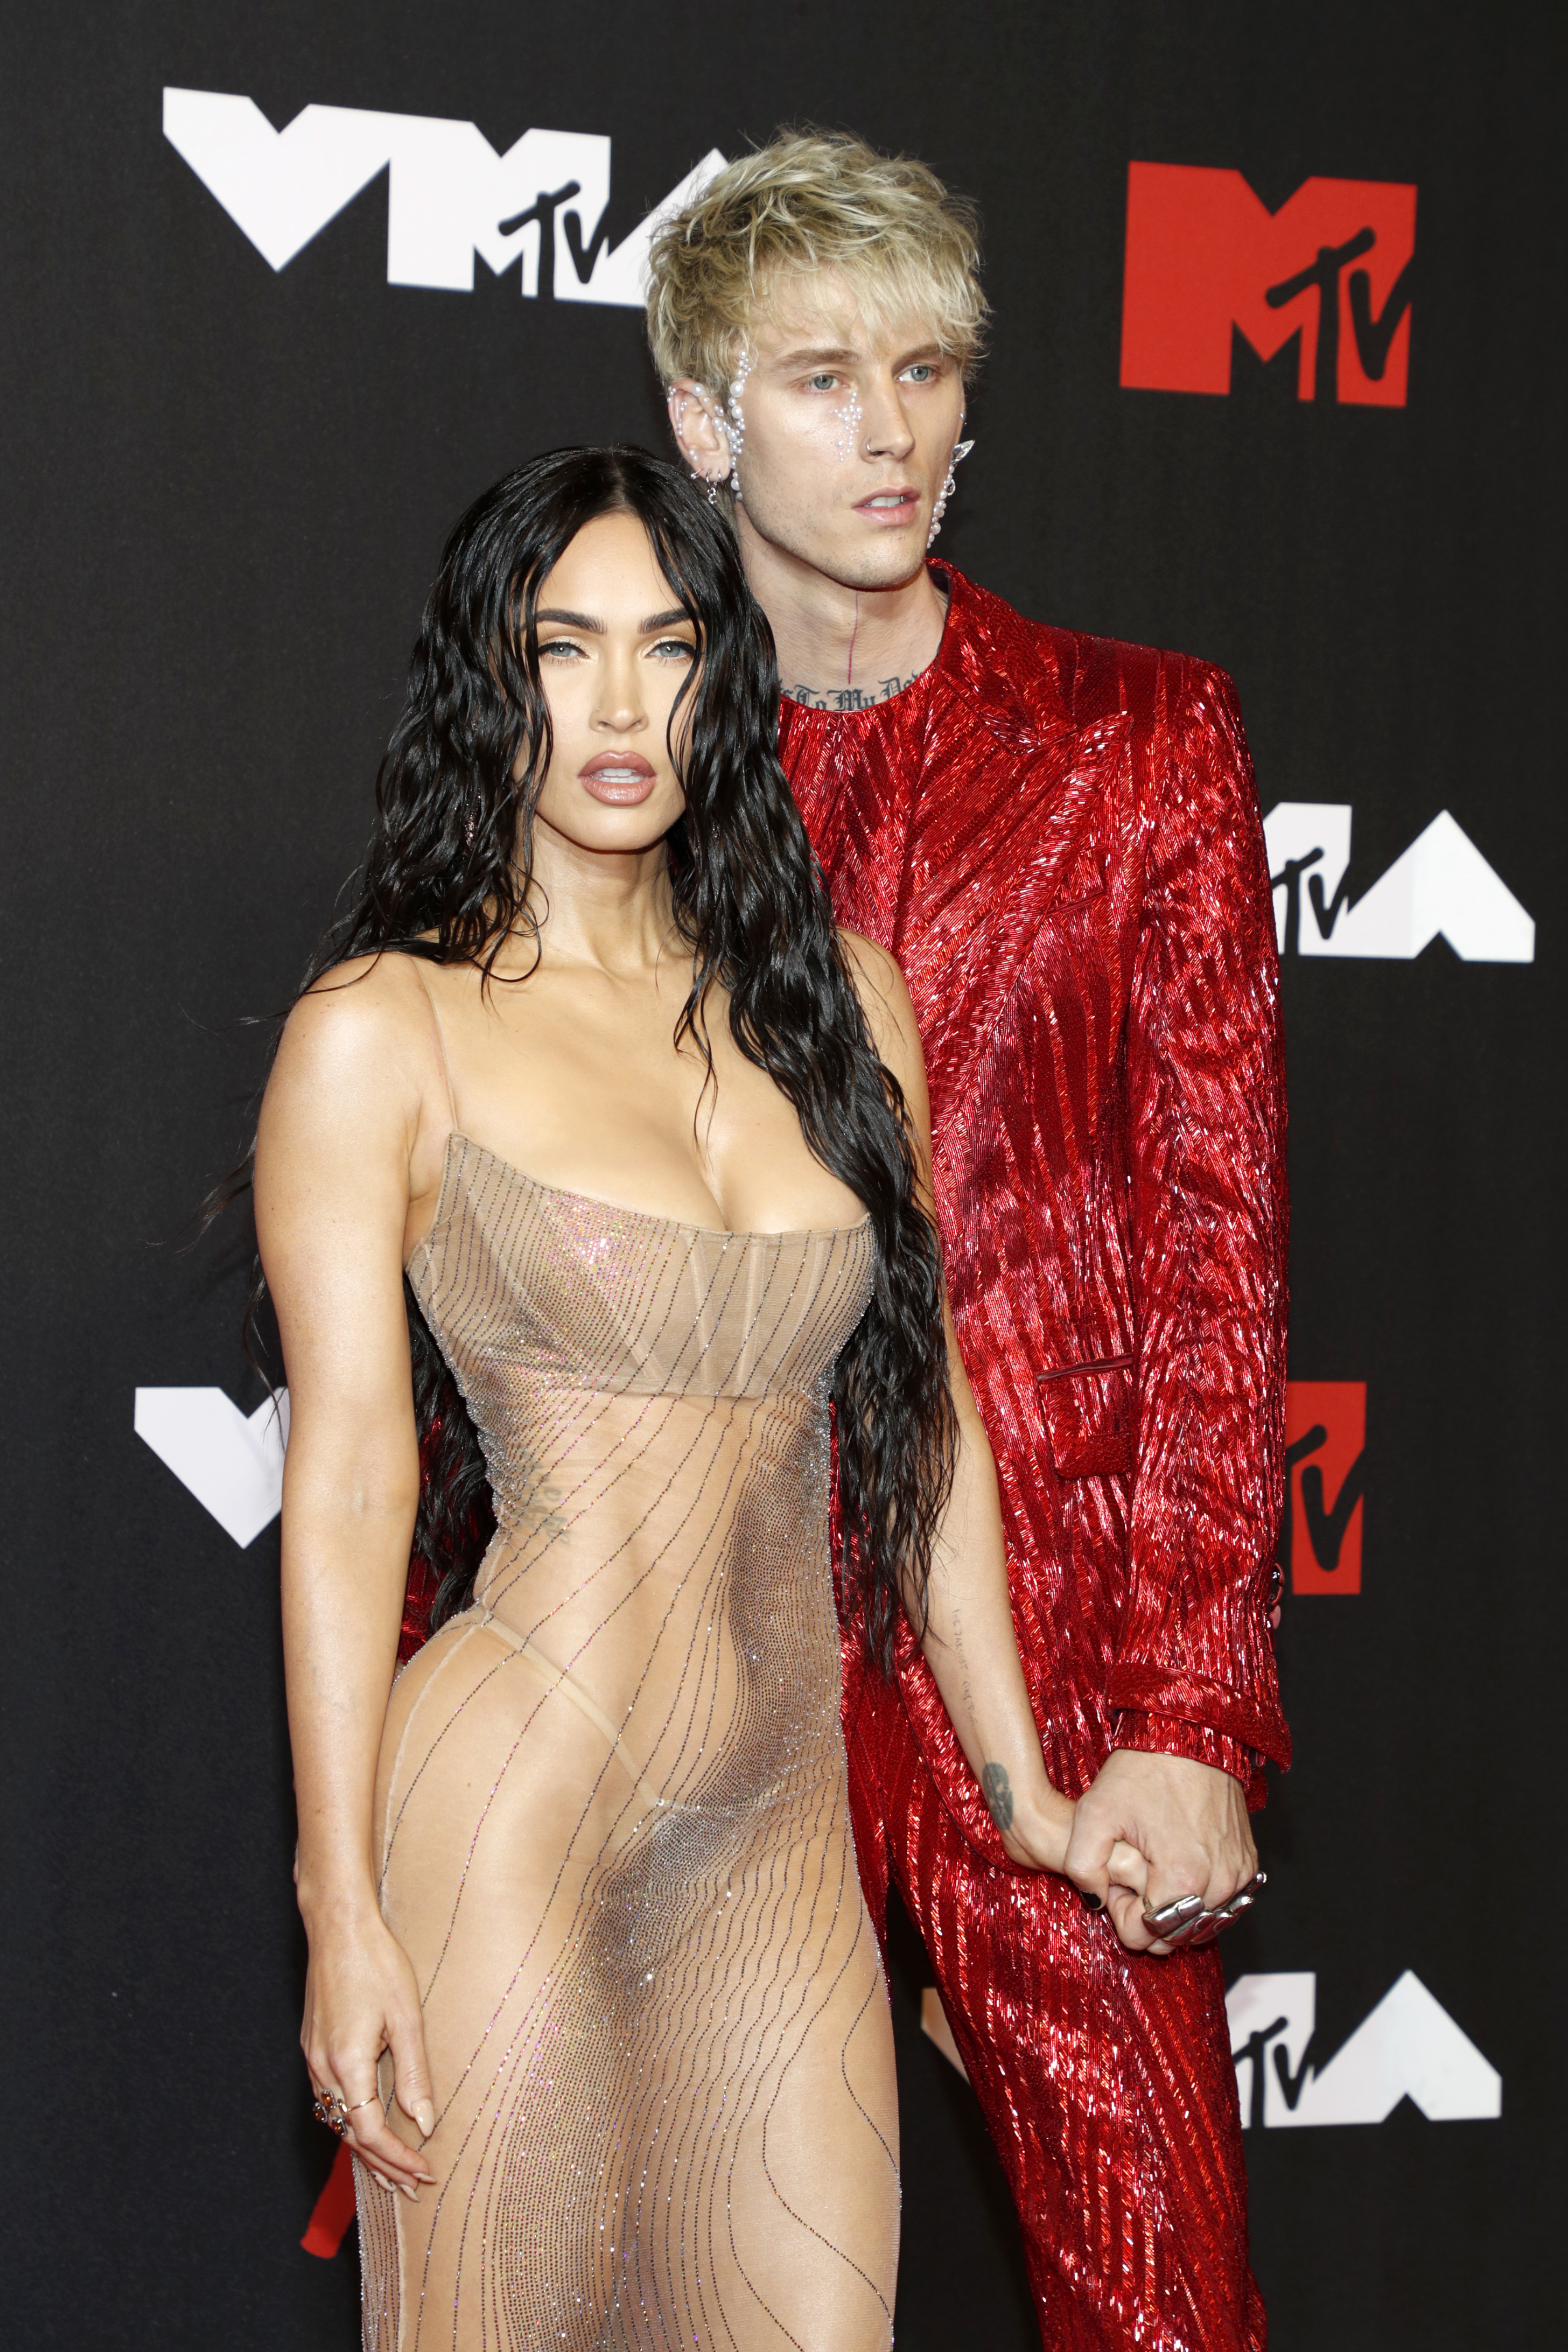 Megan in a sheer, beaded dress and MGK in a shiny red suit at the MTV VMAs